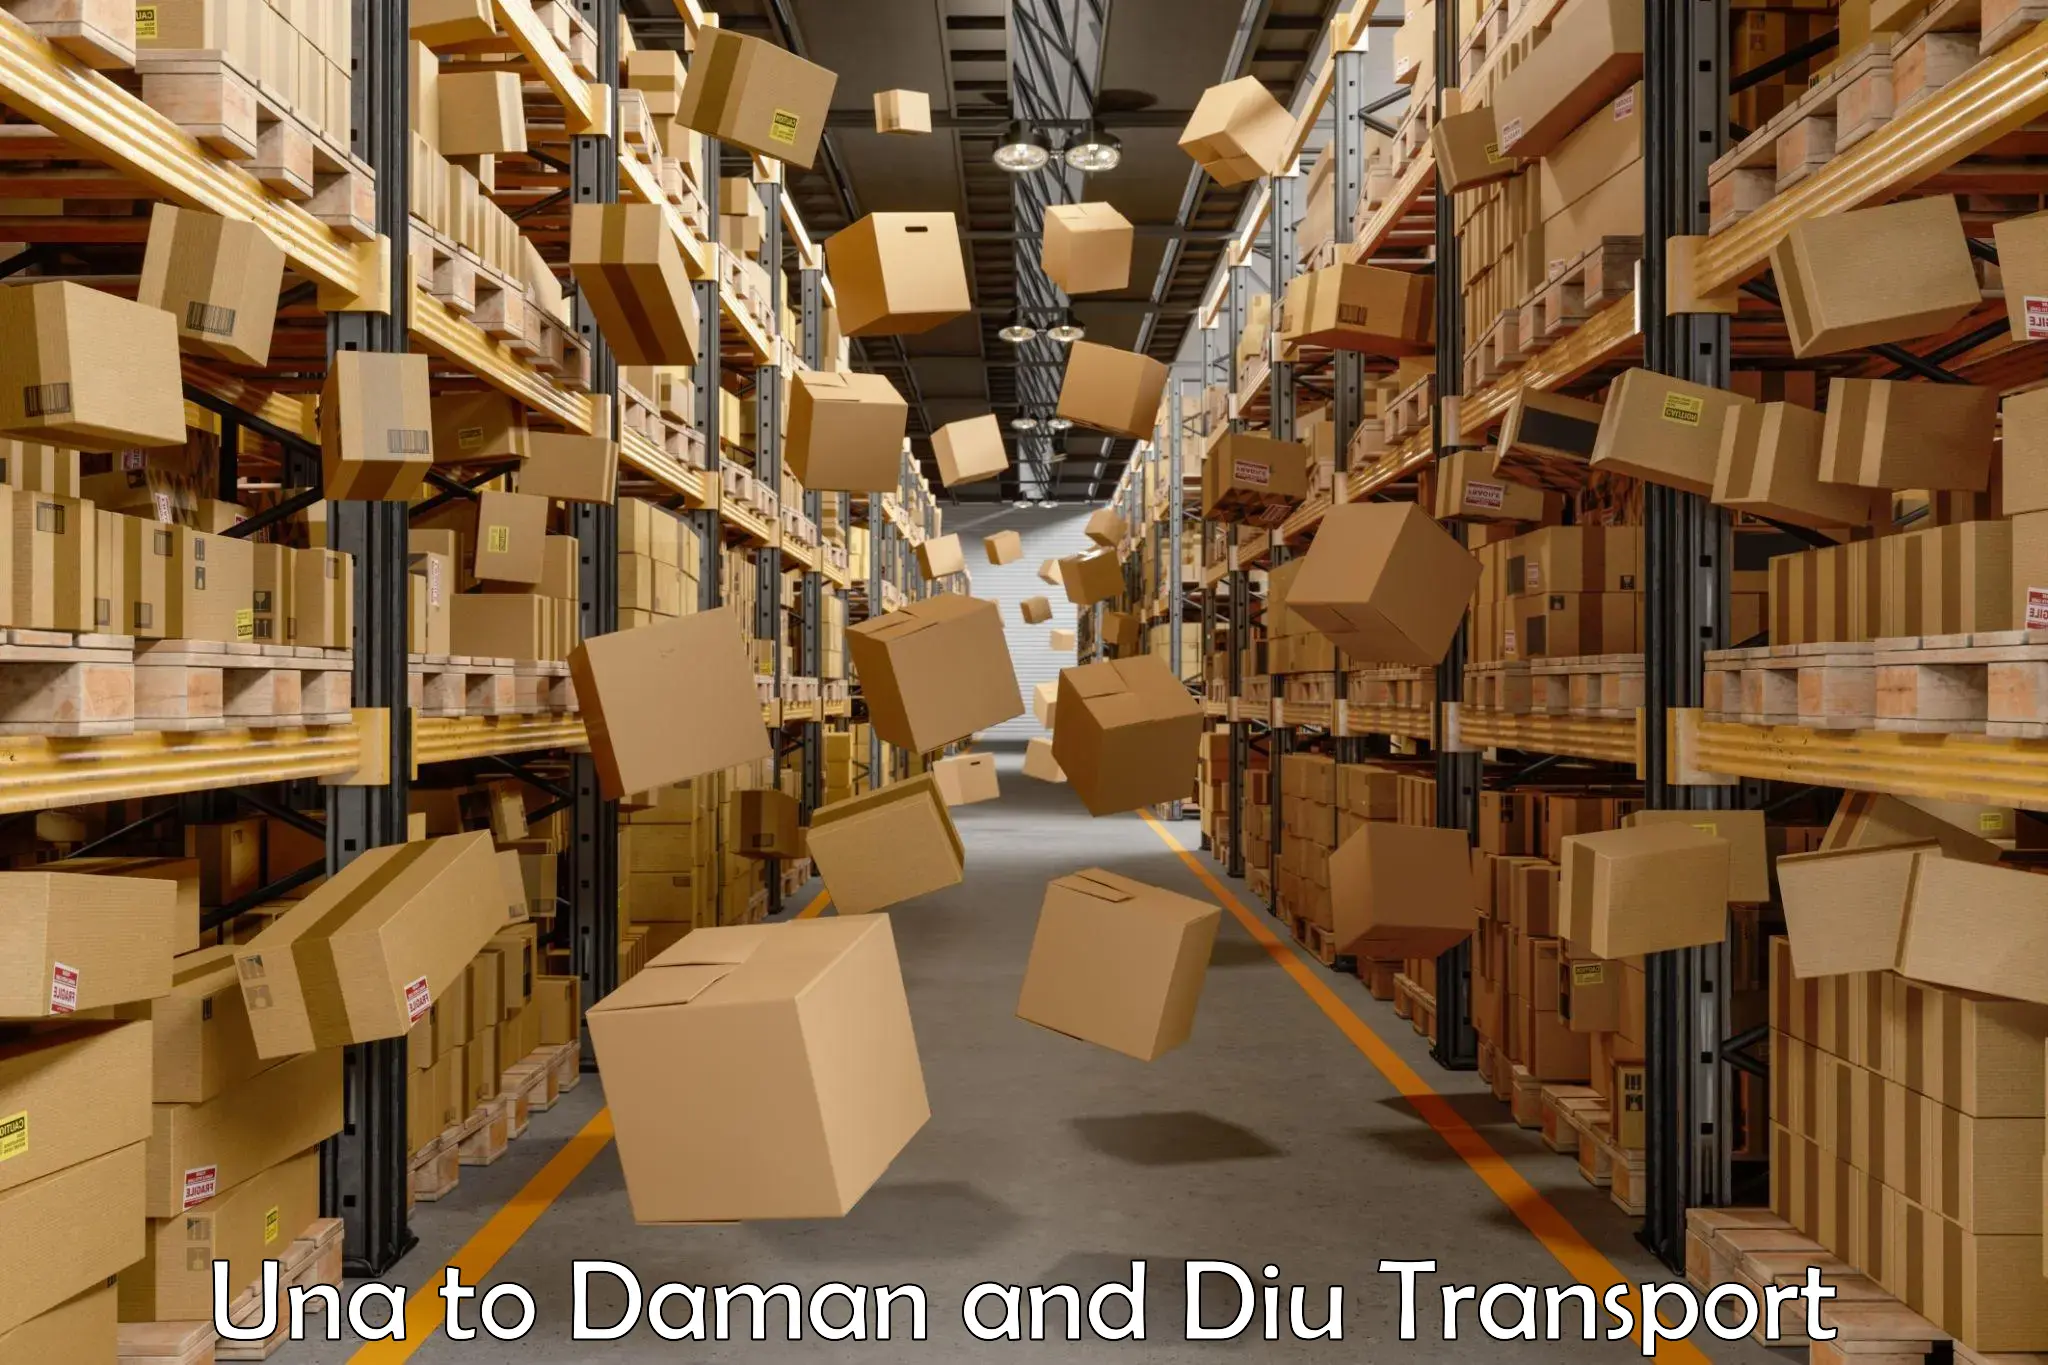 Transport in sharing Una to Daman and Diu